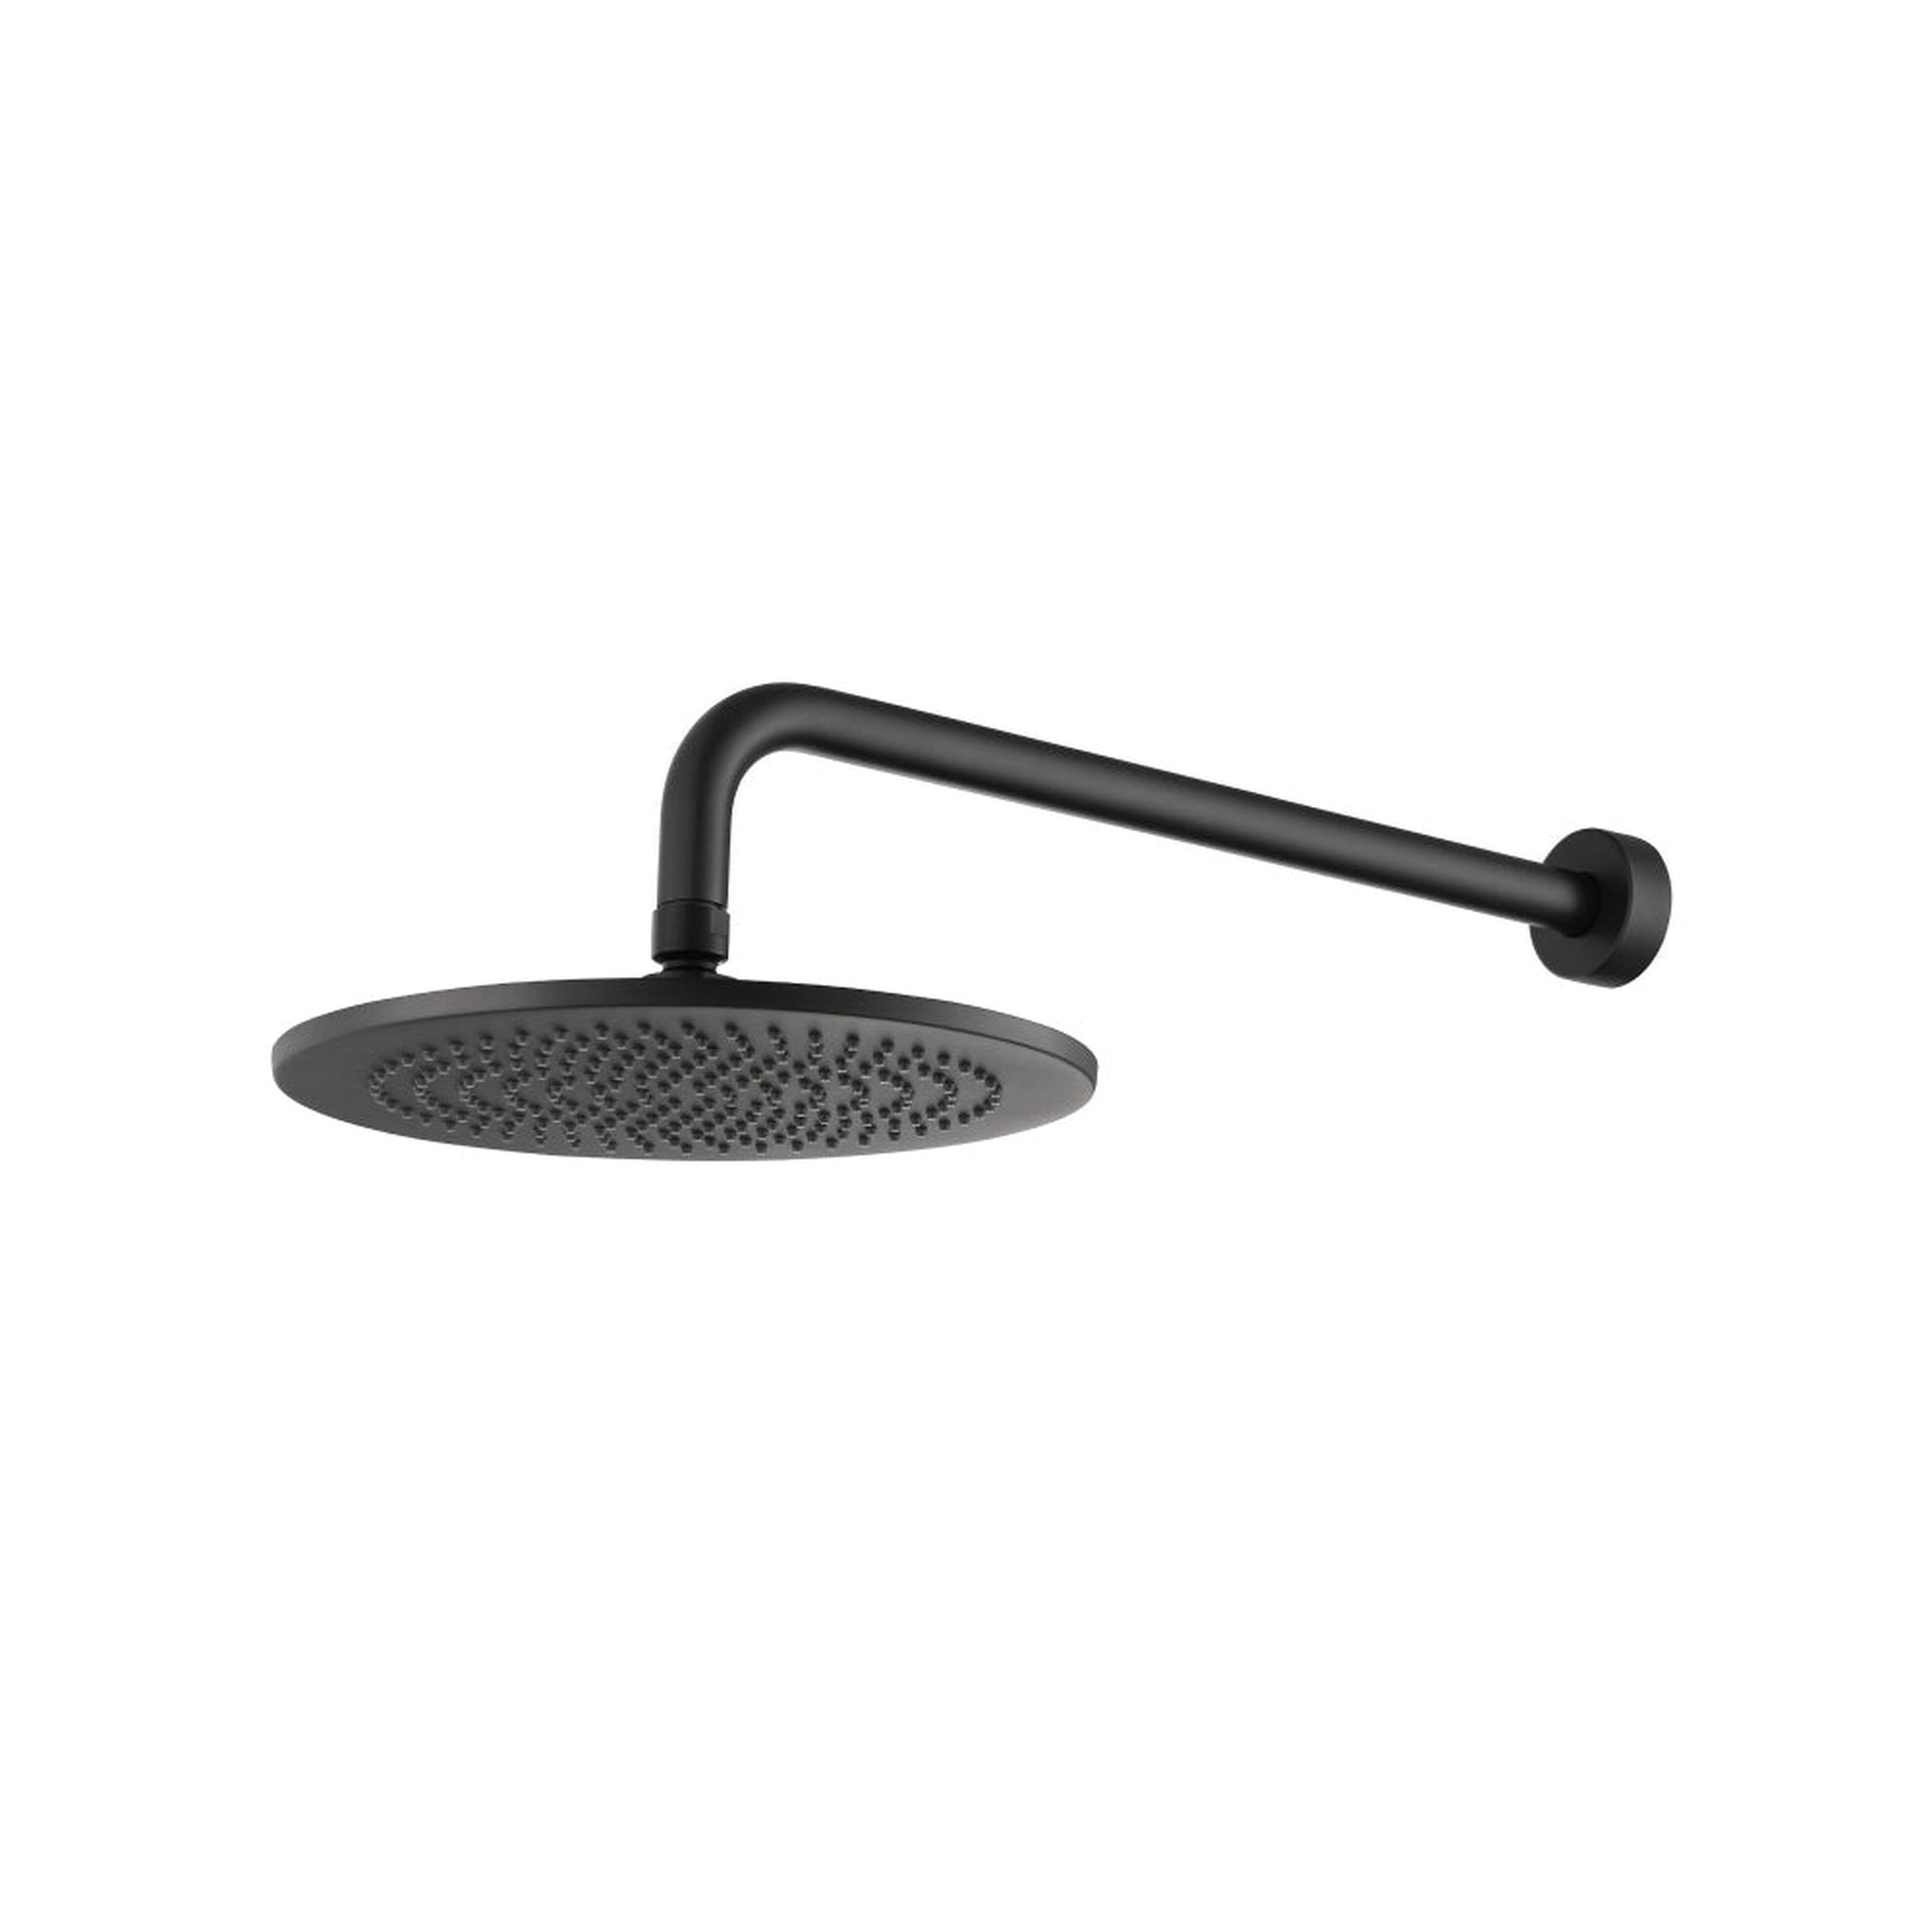 Isenberg Universal Fixtures 10" Single Function Round Matte Black Solid Brass Rain Shower Head With 15" Wall Mounted Shower Arm